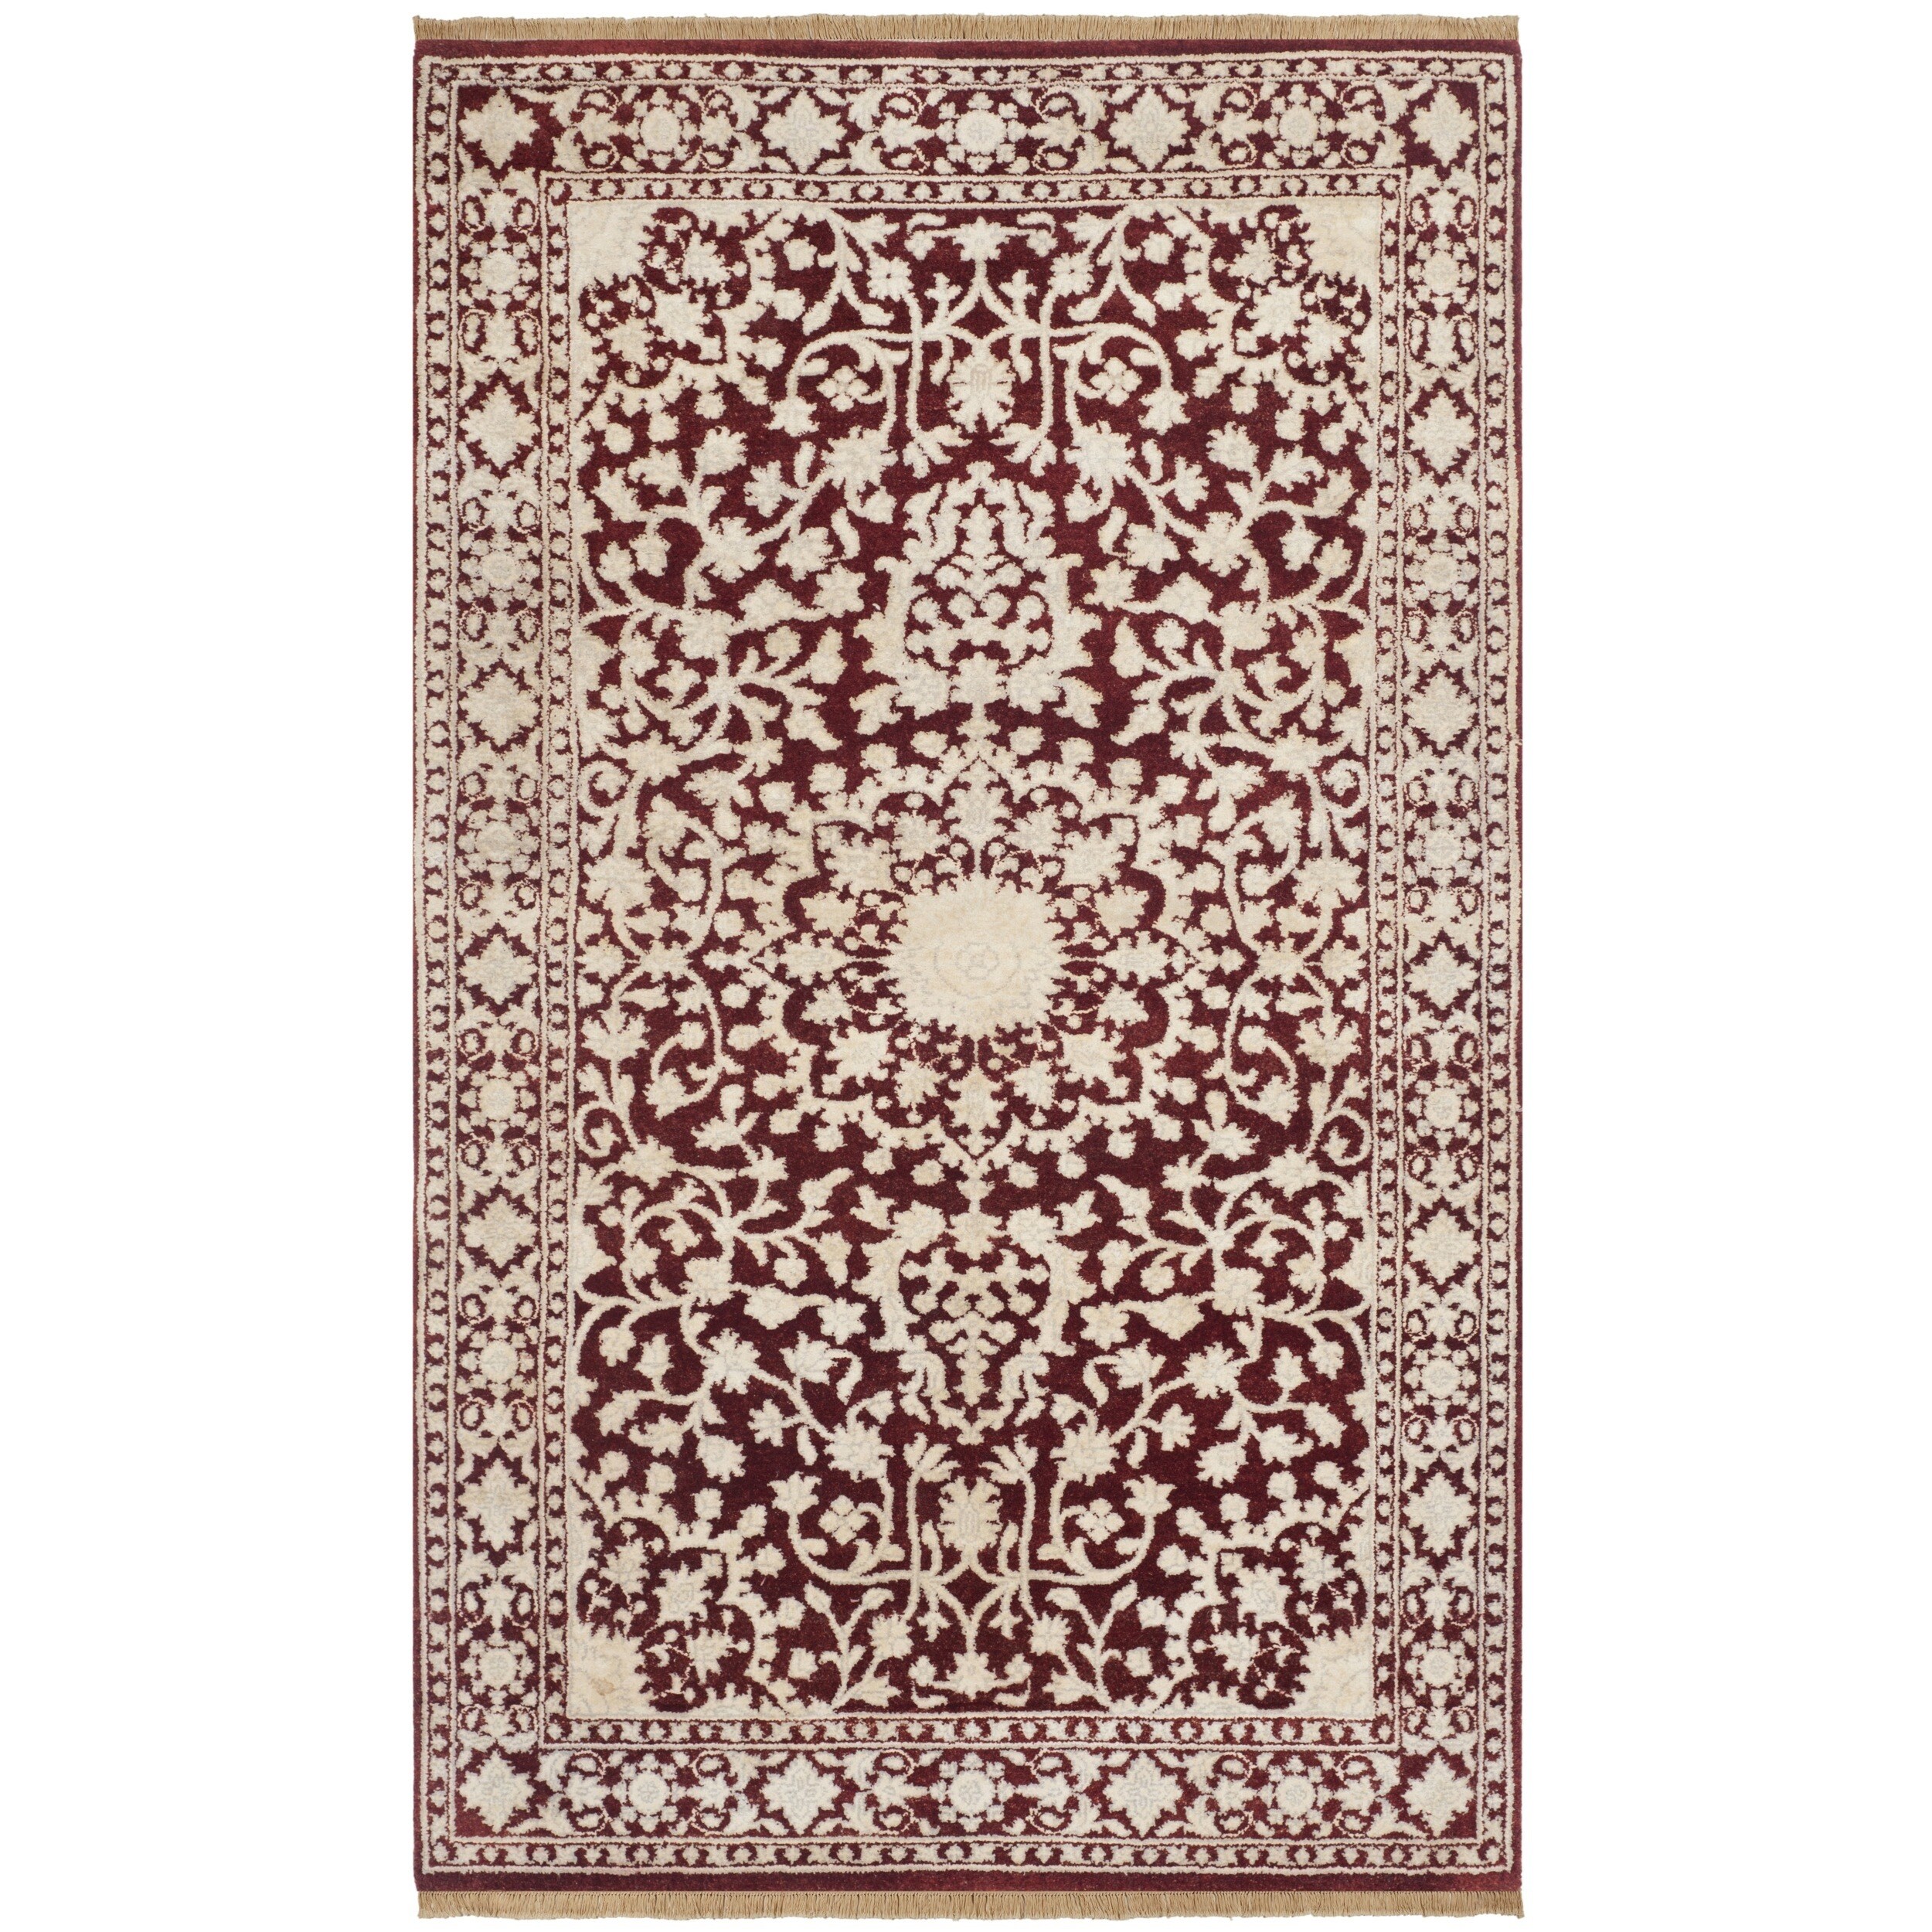 Safavieh Hand knotted Ganges River Red/ Ivory Wool Rug (3 X 5)